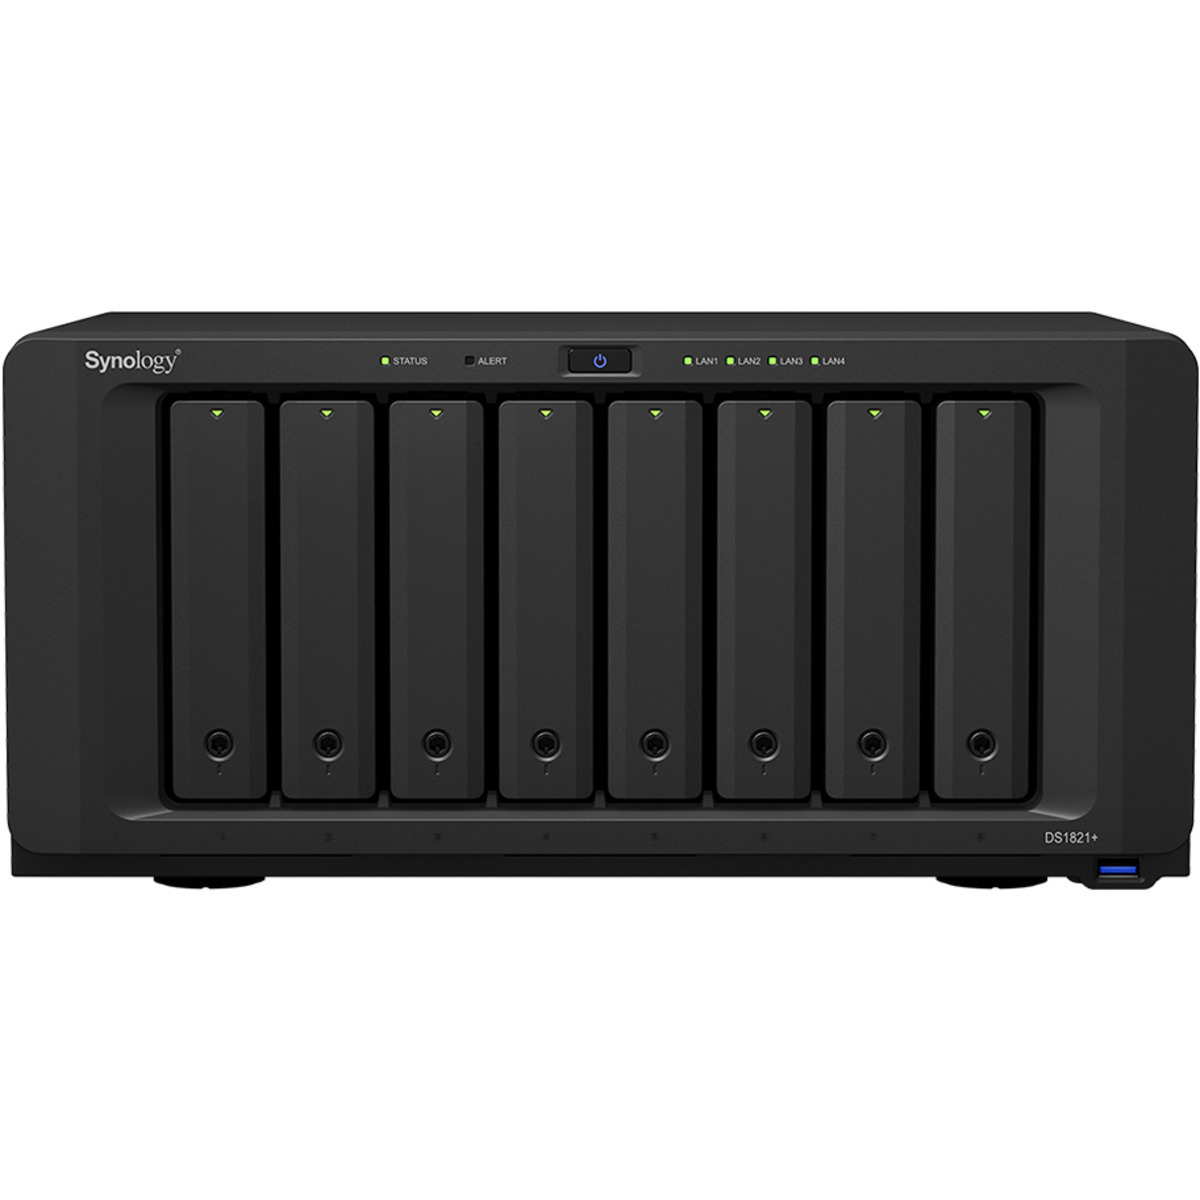 Synology DiskStation DS1821+ 8tb 8-Bay Desktop Multimedia / Power User / Business NAS - Network Attached Storage Device 8x1tb Sandisk Ultra 3D SDSSDH3-1T00 2.5 560/520MB/s SATA 6Gb/s SSD CONSUMER Class Drives Installed - Burn-In Tested - FREE RAM UPGRADE DiskStation DS1821+